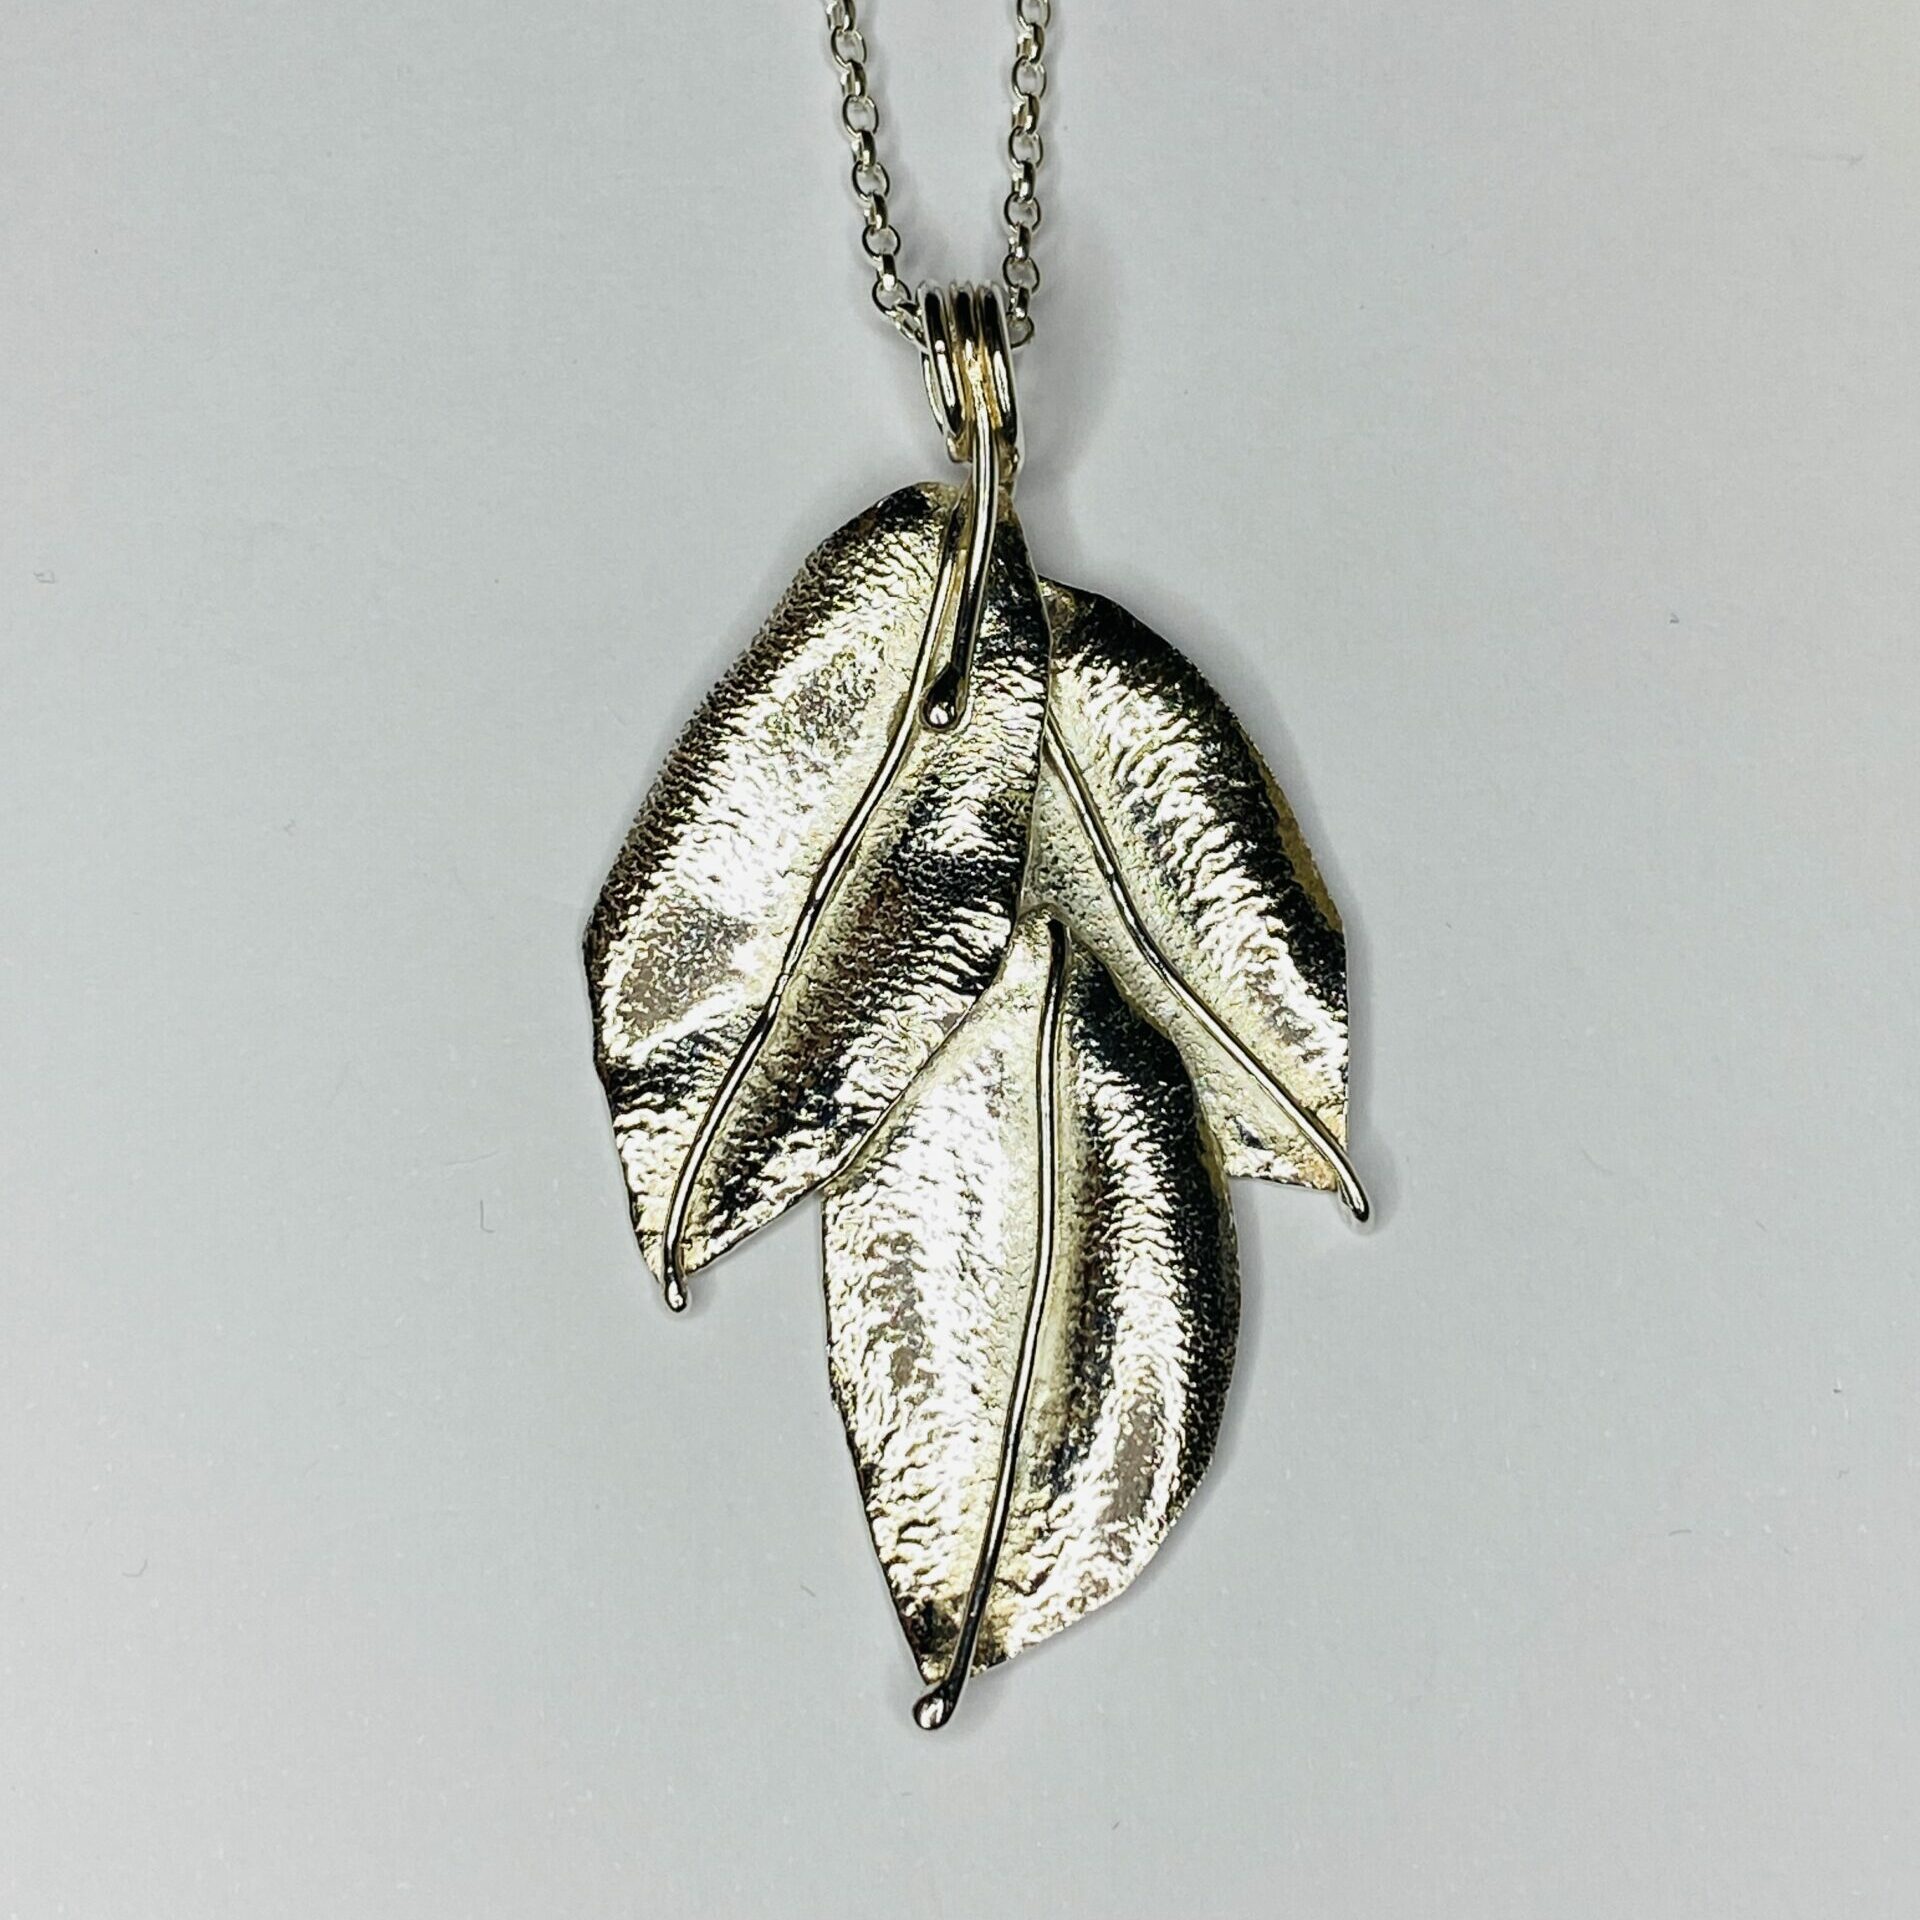 Pendant – Sterling Silver Three Reticulated Leaves